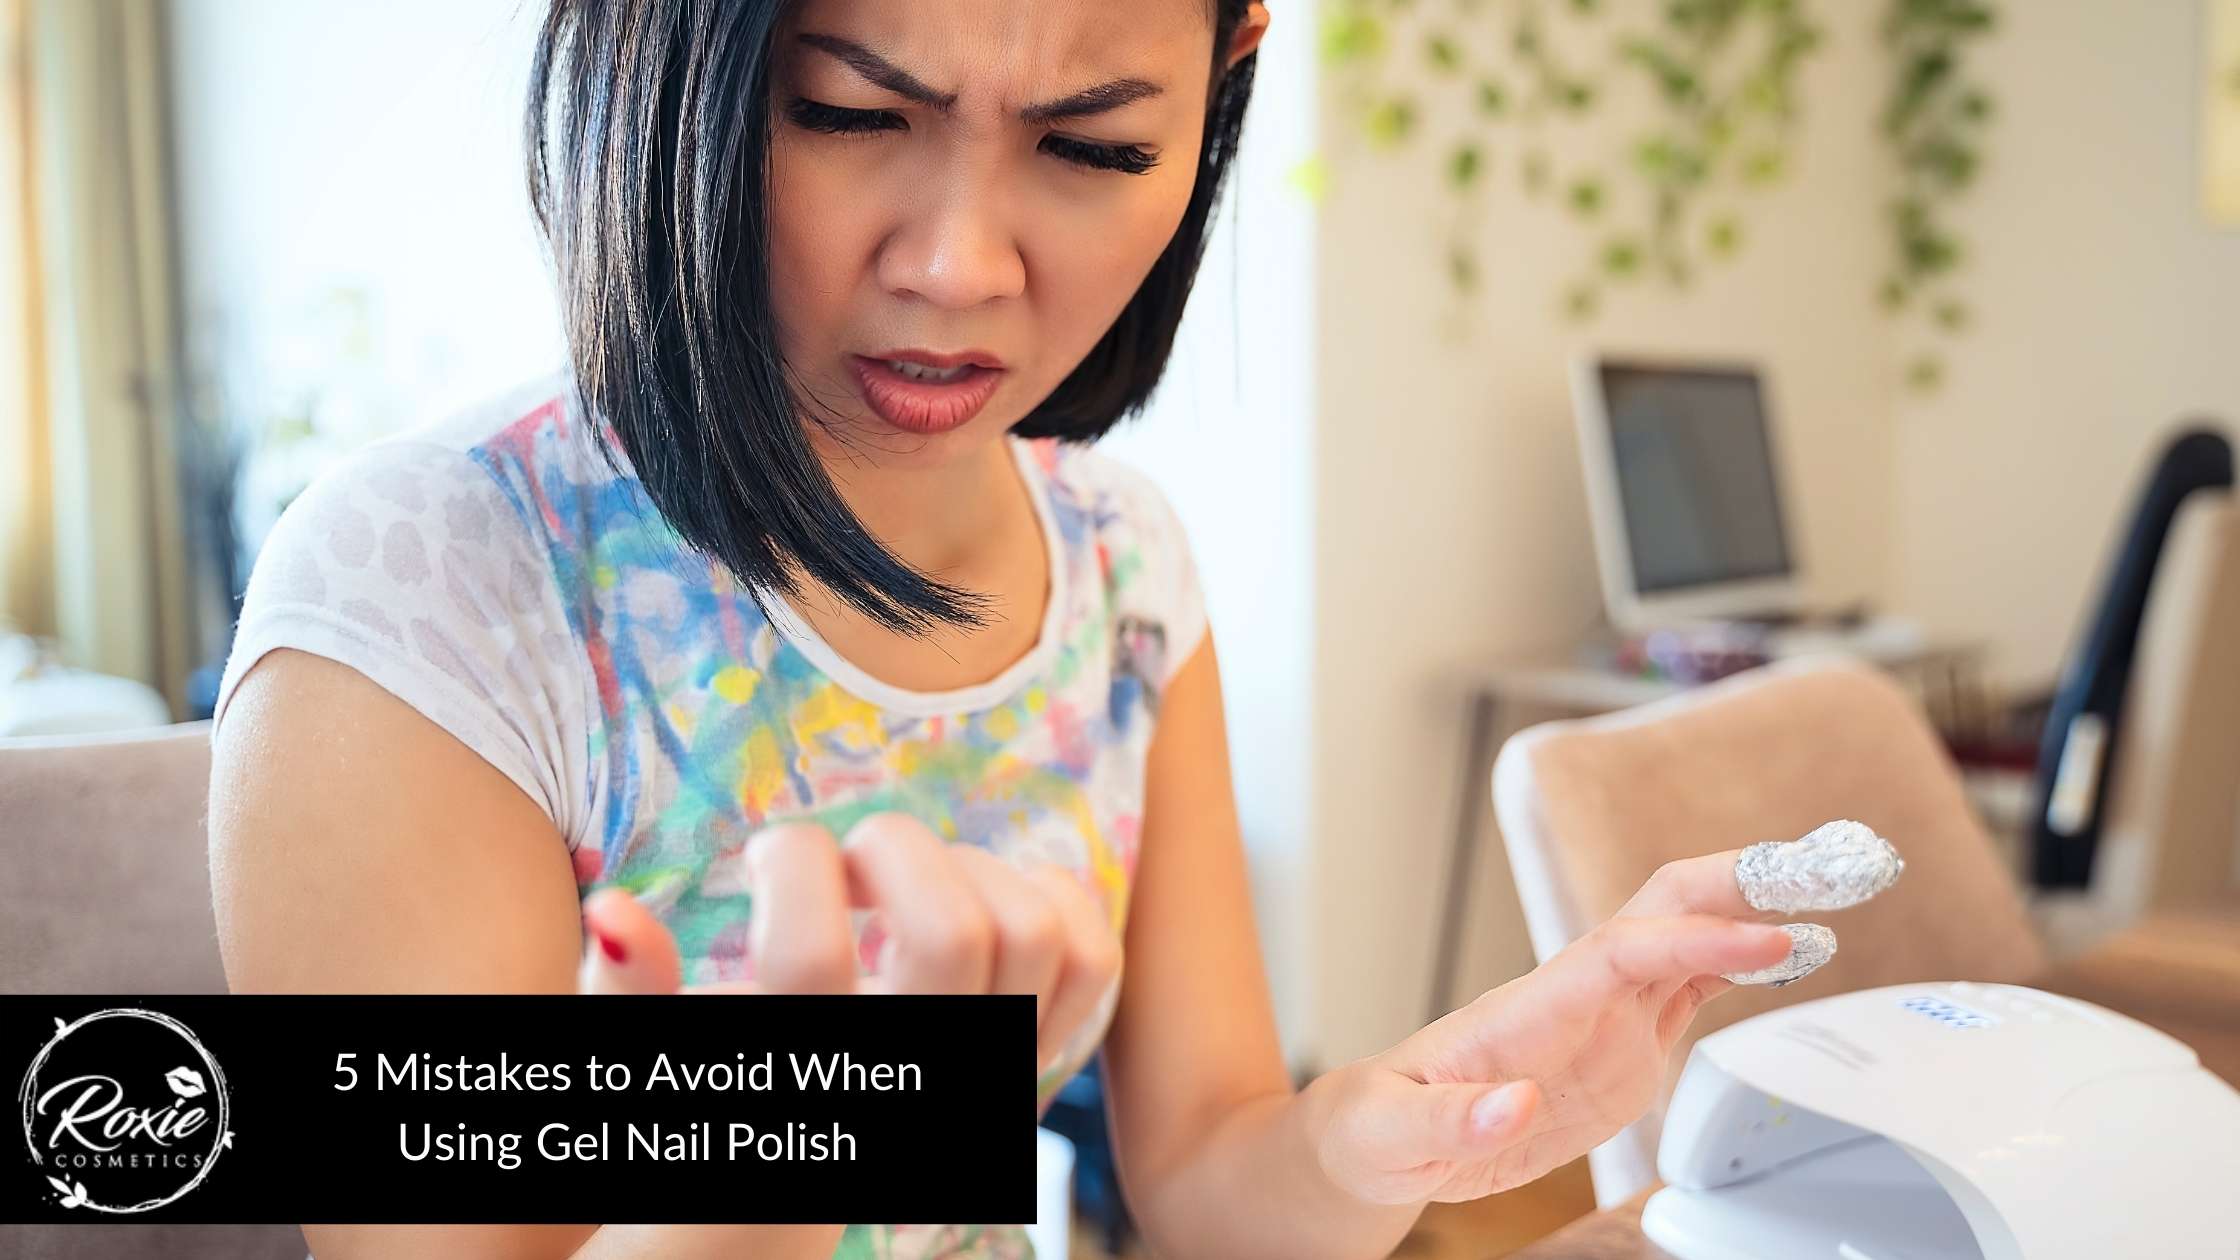 3. Gel Nail Polish and Design Ideas - wide 9